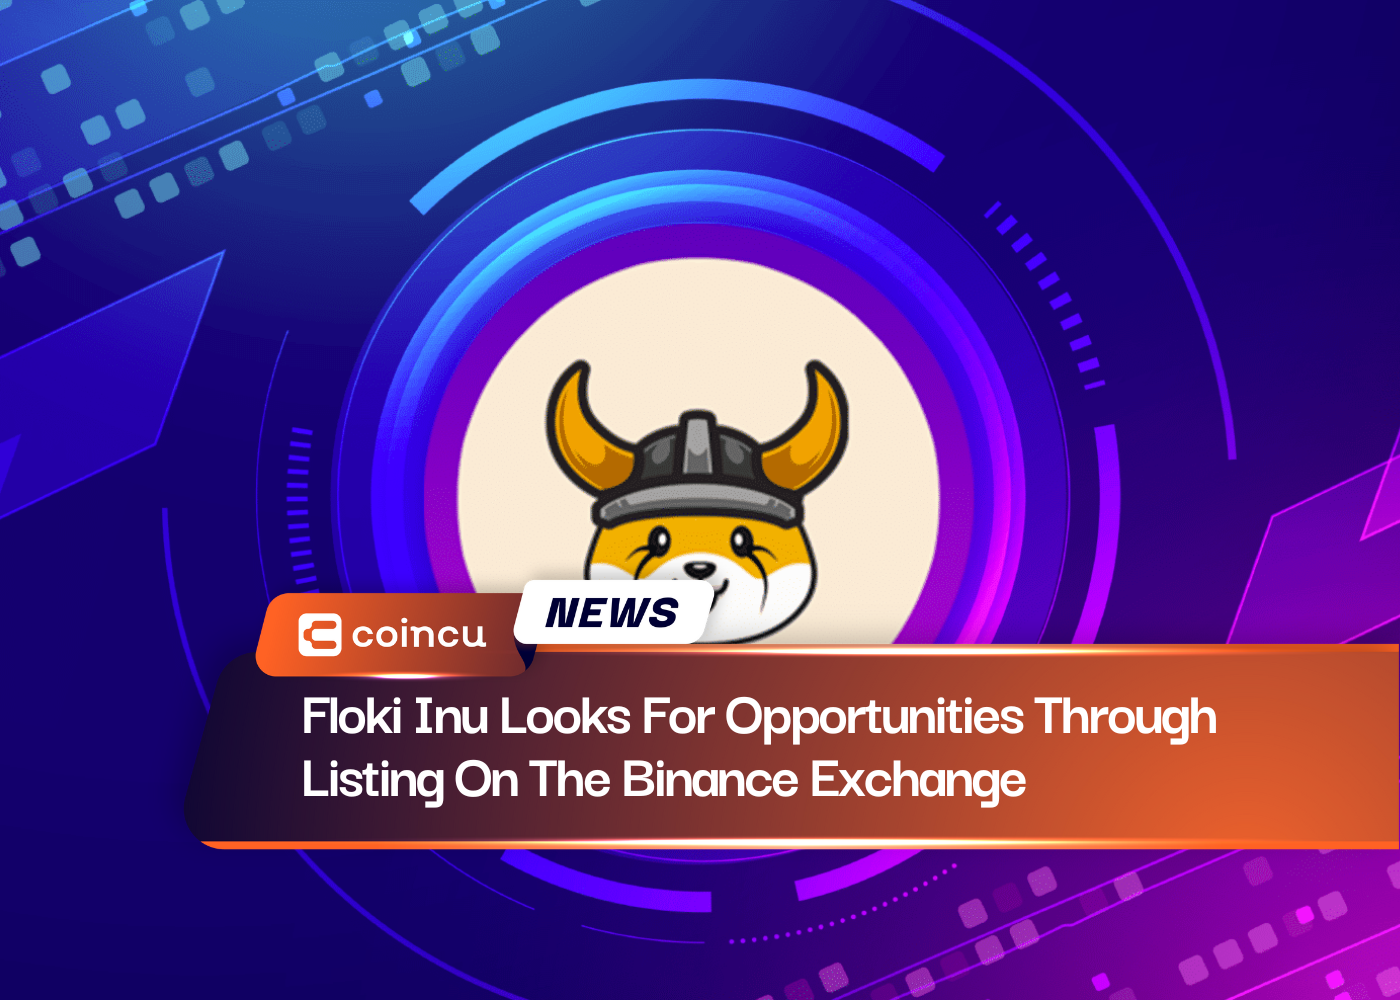 Floki Inu Looks For Opportunities Through Listing On The Binance Exchange